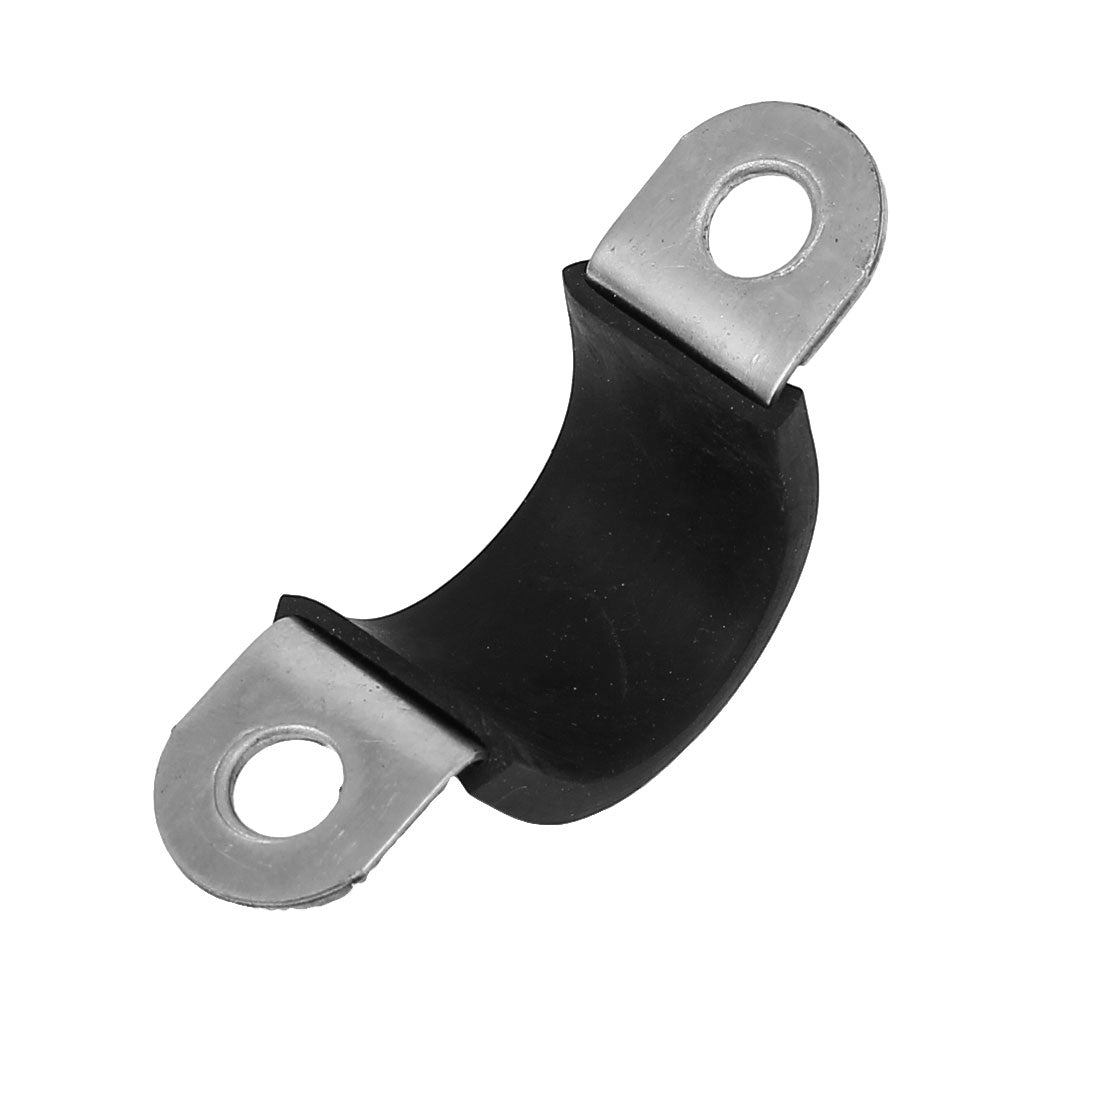 uxcell Uxcell 18mm U Clips EPDM Rubber Lined Mounting Brackets Clamps 5pcs for Pipe Tube Cable